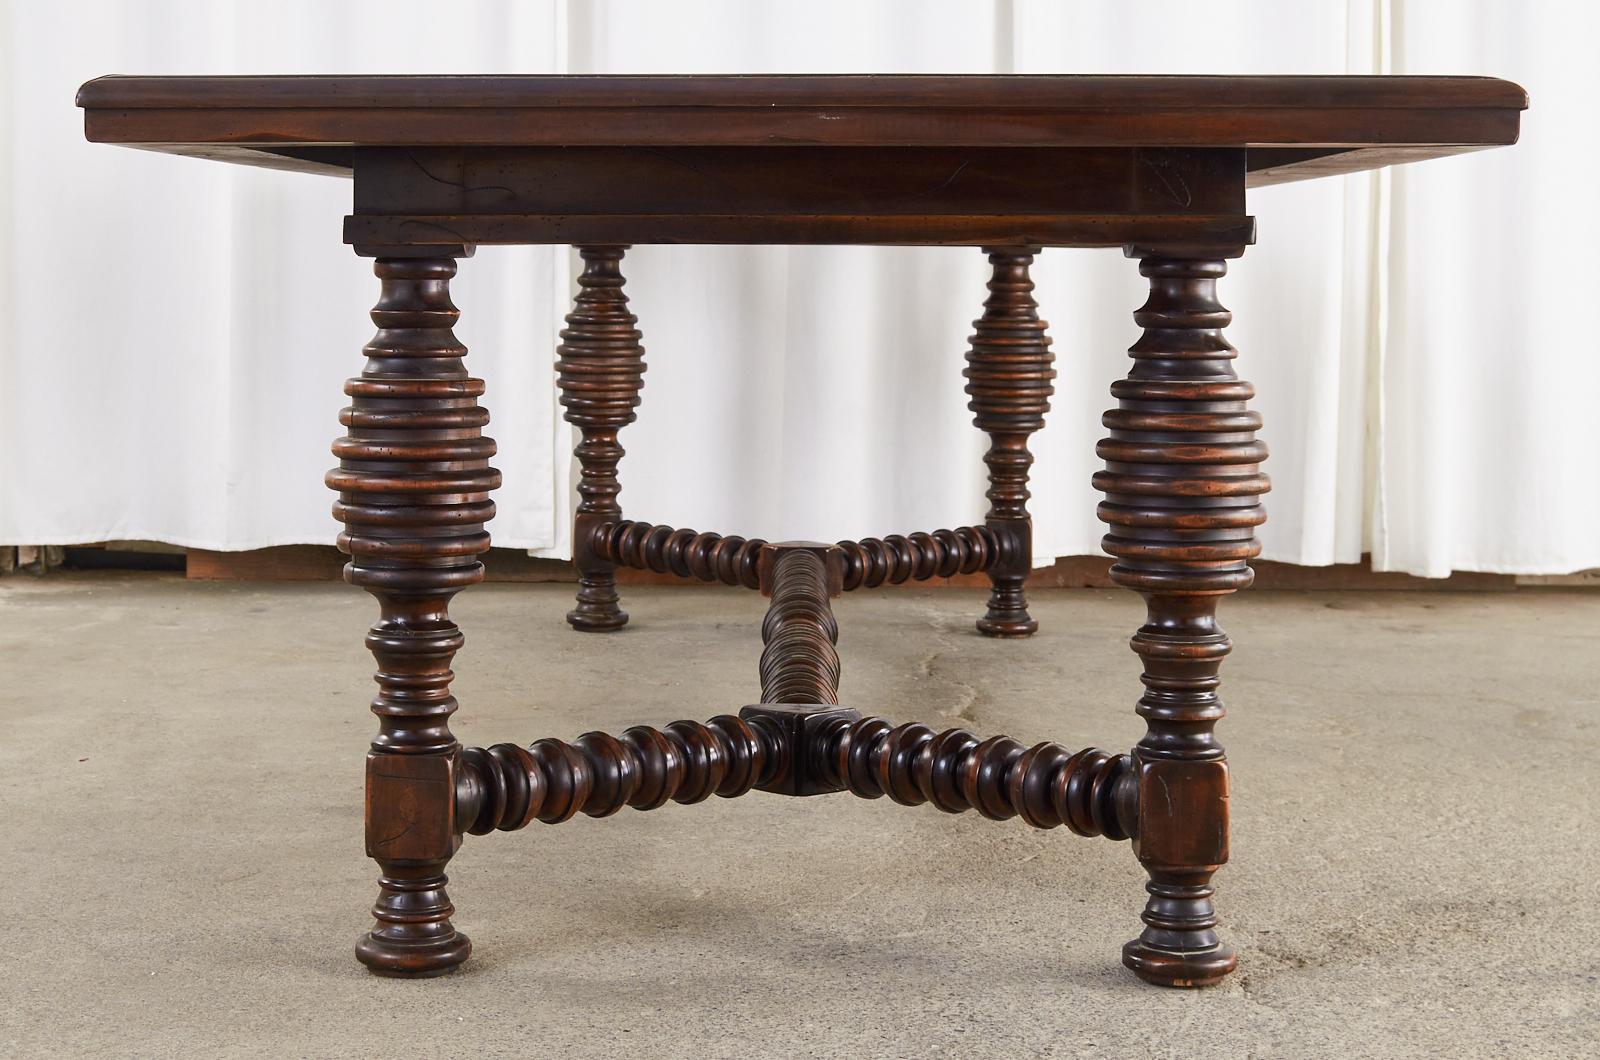 Hand-Crafted Portuguese Baroque Style Dining Table with Parquetry Inlay